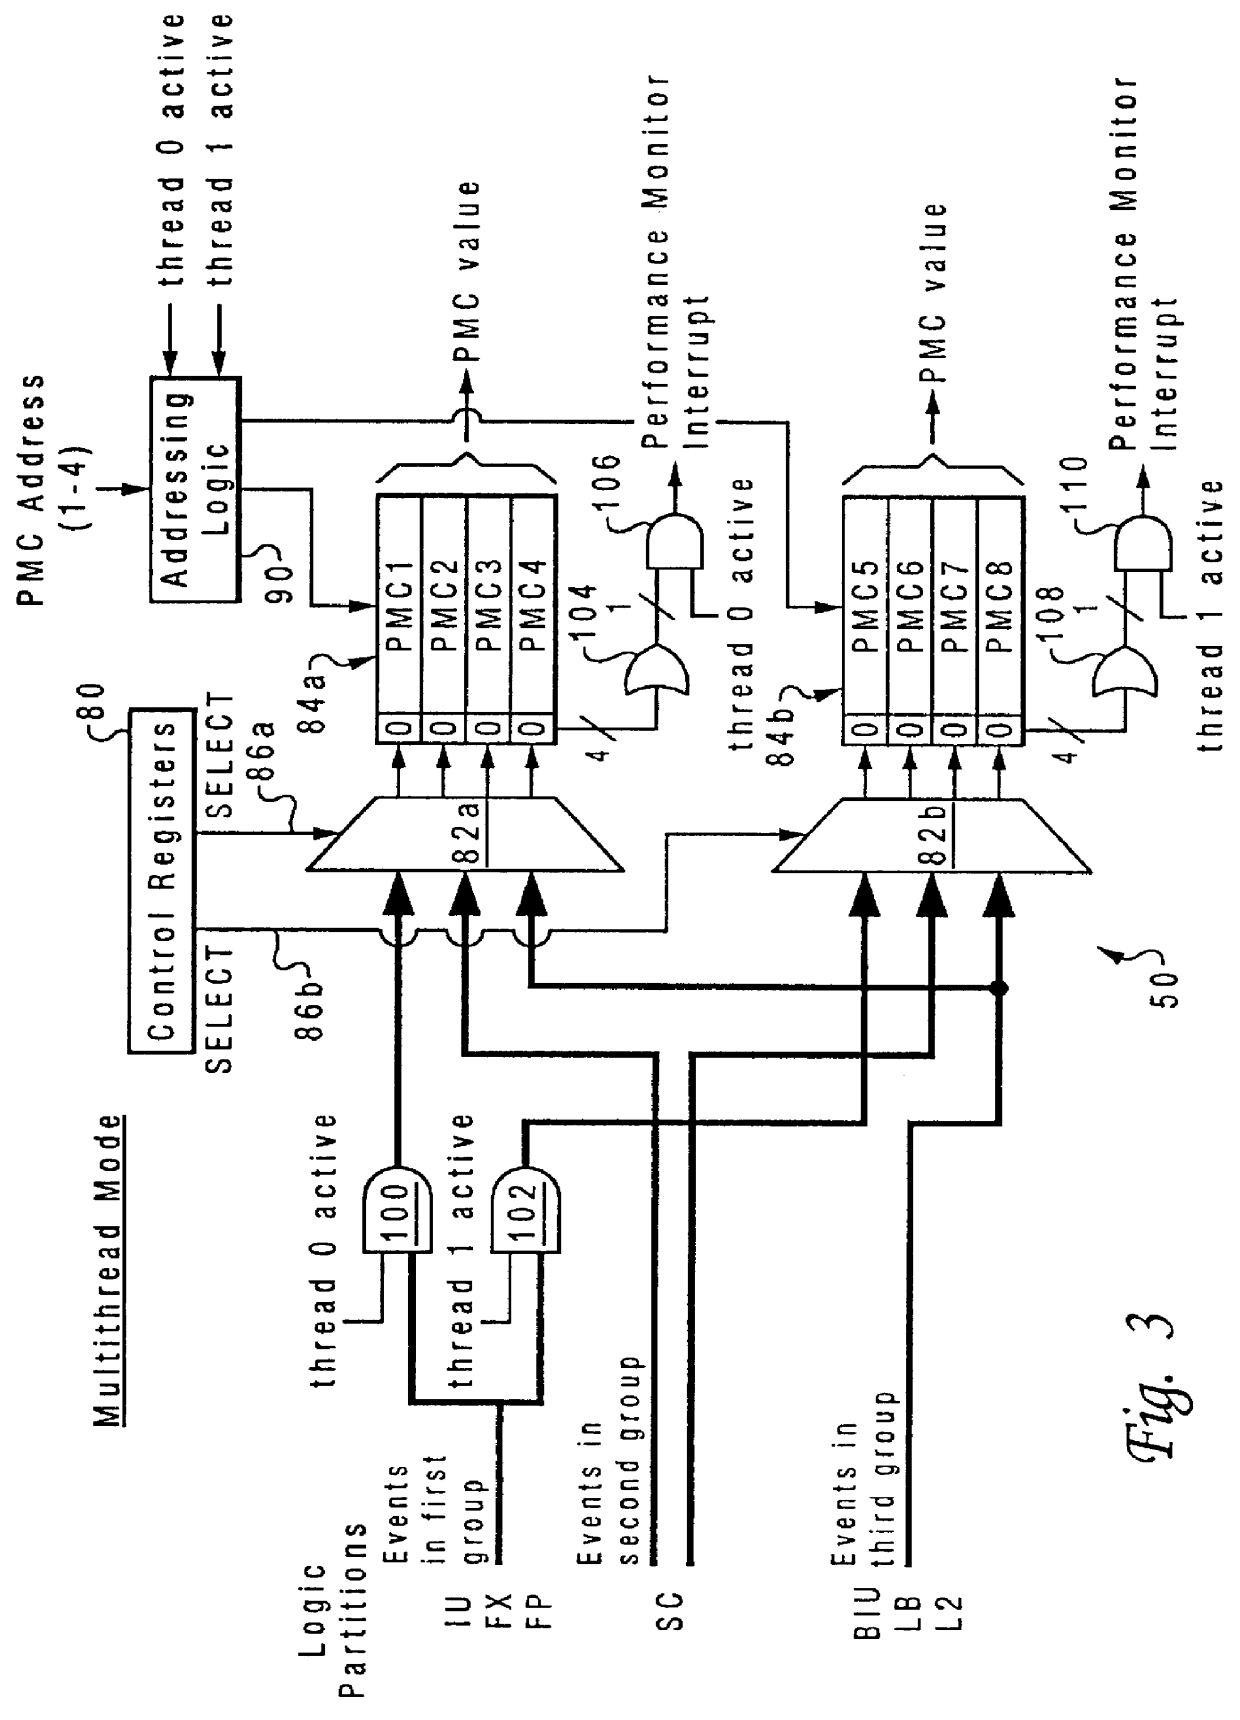 Performance monitoring of thread switch events in a multithreaded processor